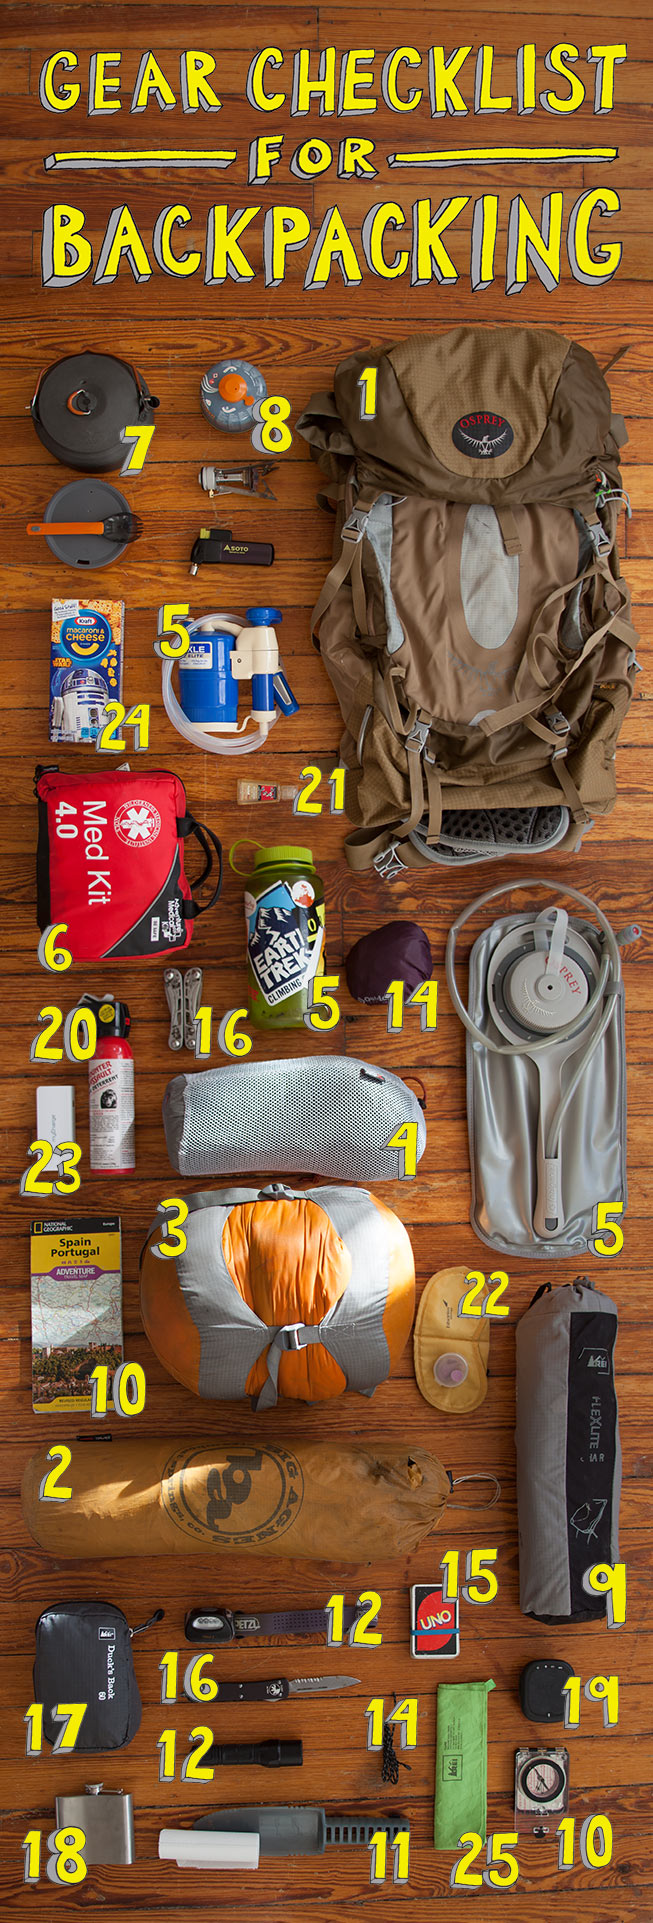 Gear Checklist for Backpacking